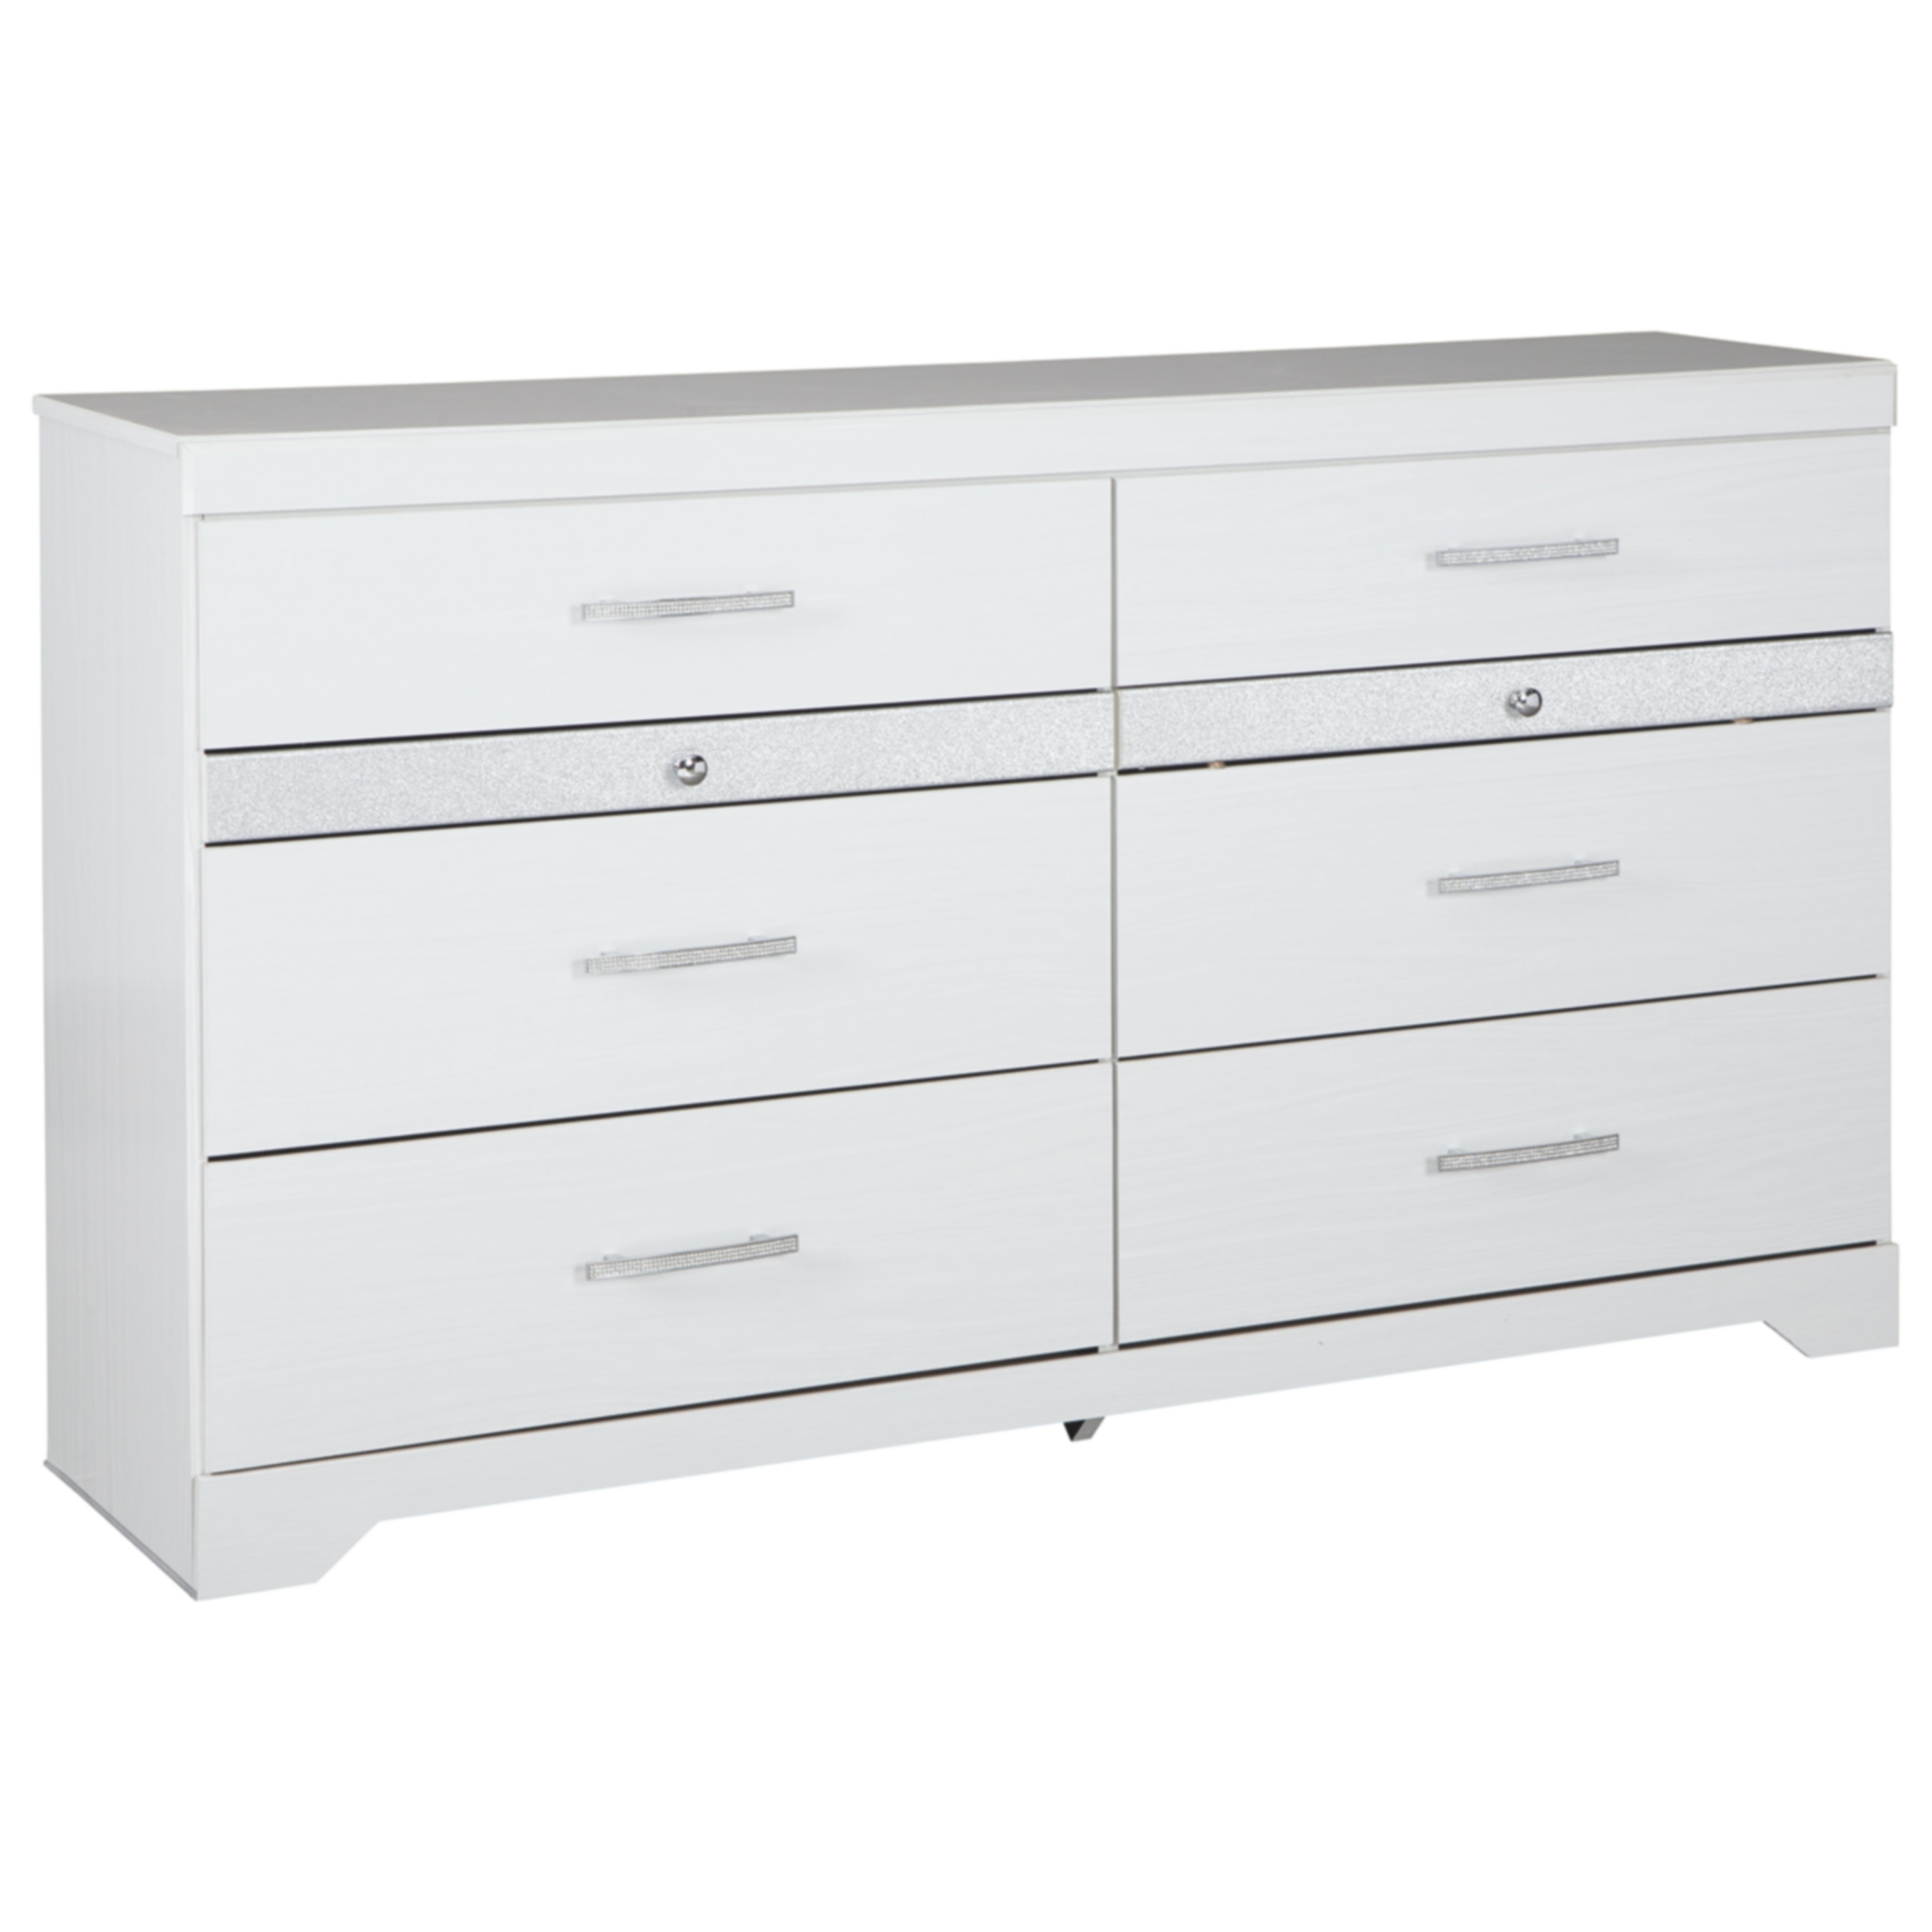 Shop Jallory Glossy White 6 Drawer Dresser Overstock 29075999